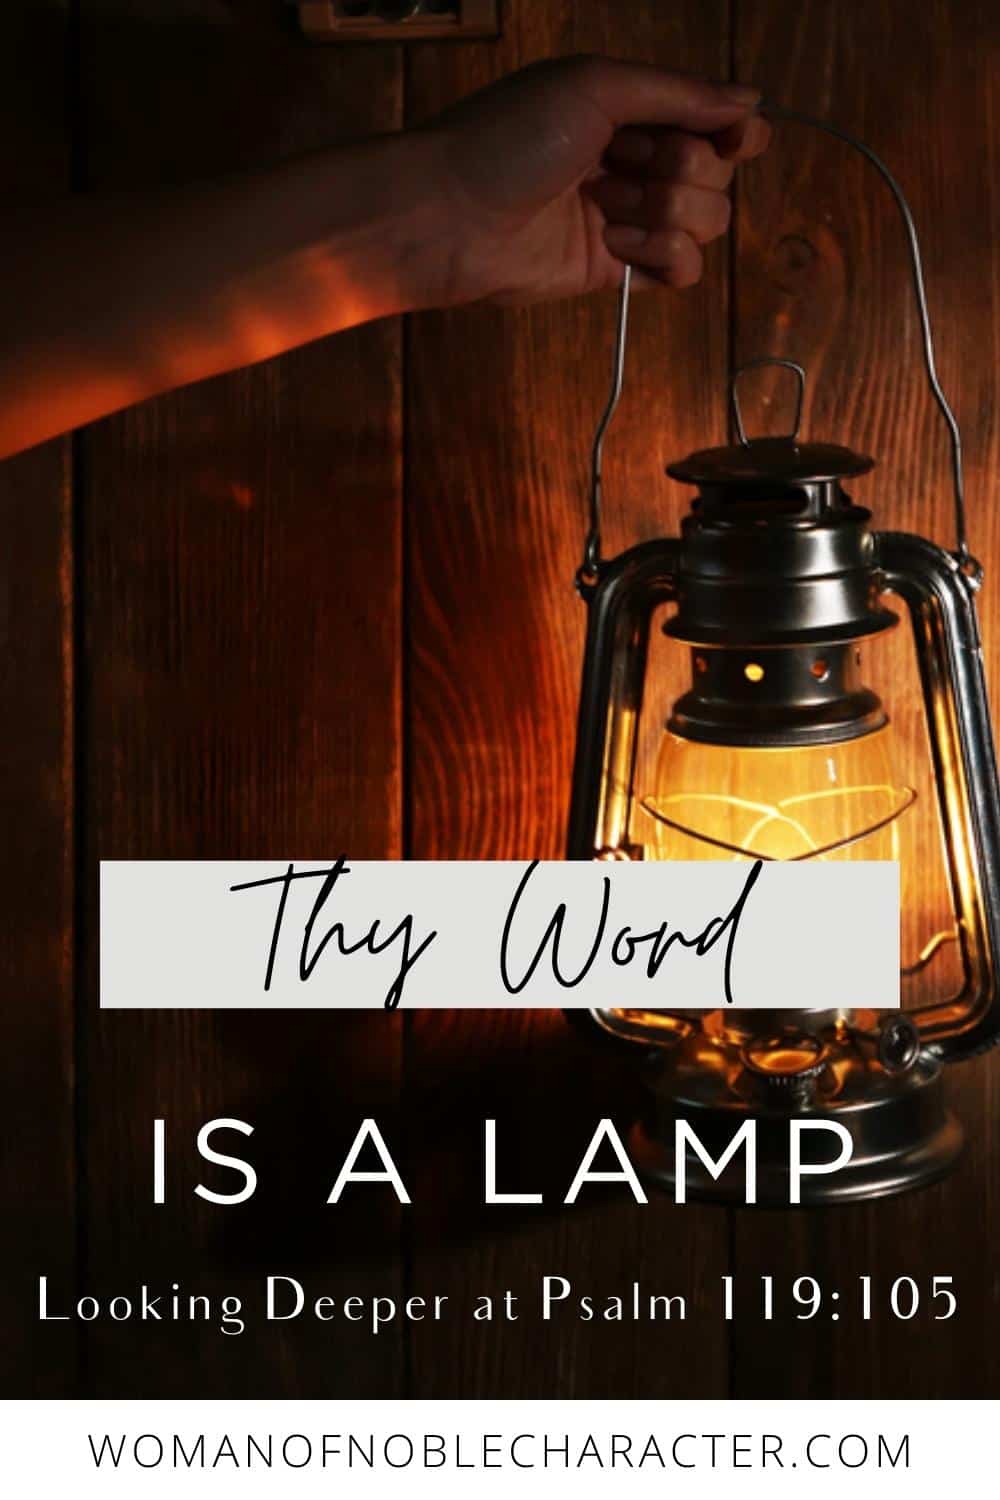 image of lantern in dark with the text Thy Word is a lamp looking deeper at Psalm 119:15